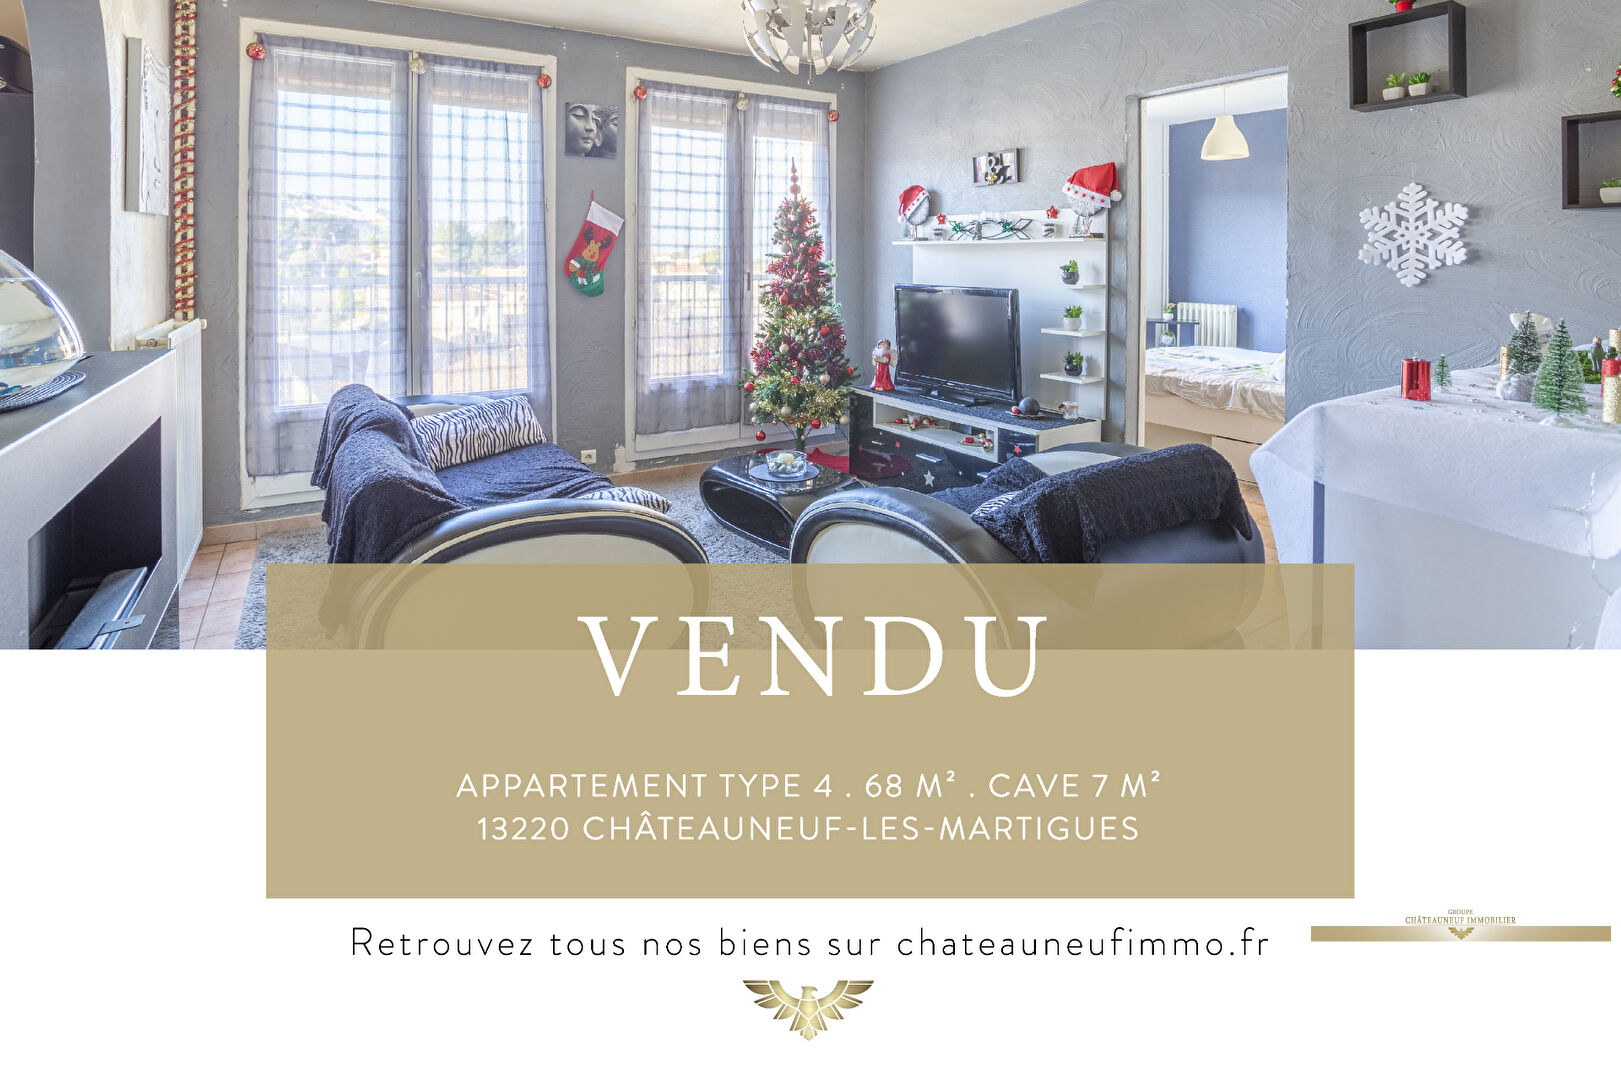 APPARTEMENT / CHATEAUNEUF / TYPE 4 / 68 M² / LA RESIDENCE / CAVE 7 m²  – VENDU